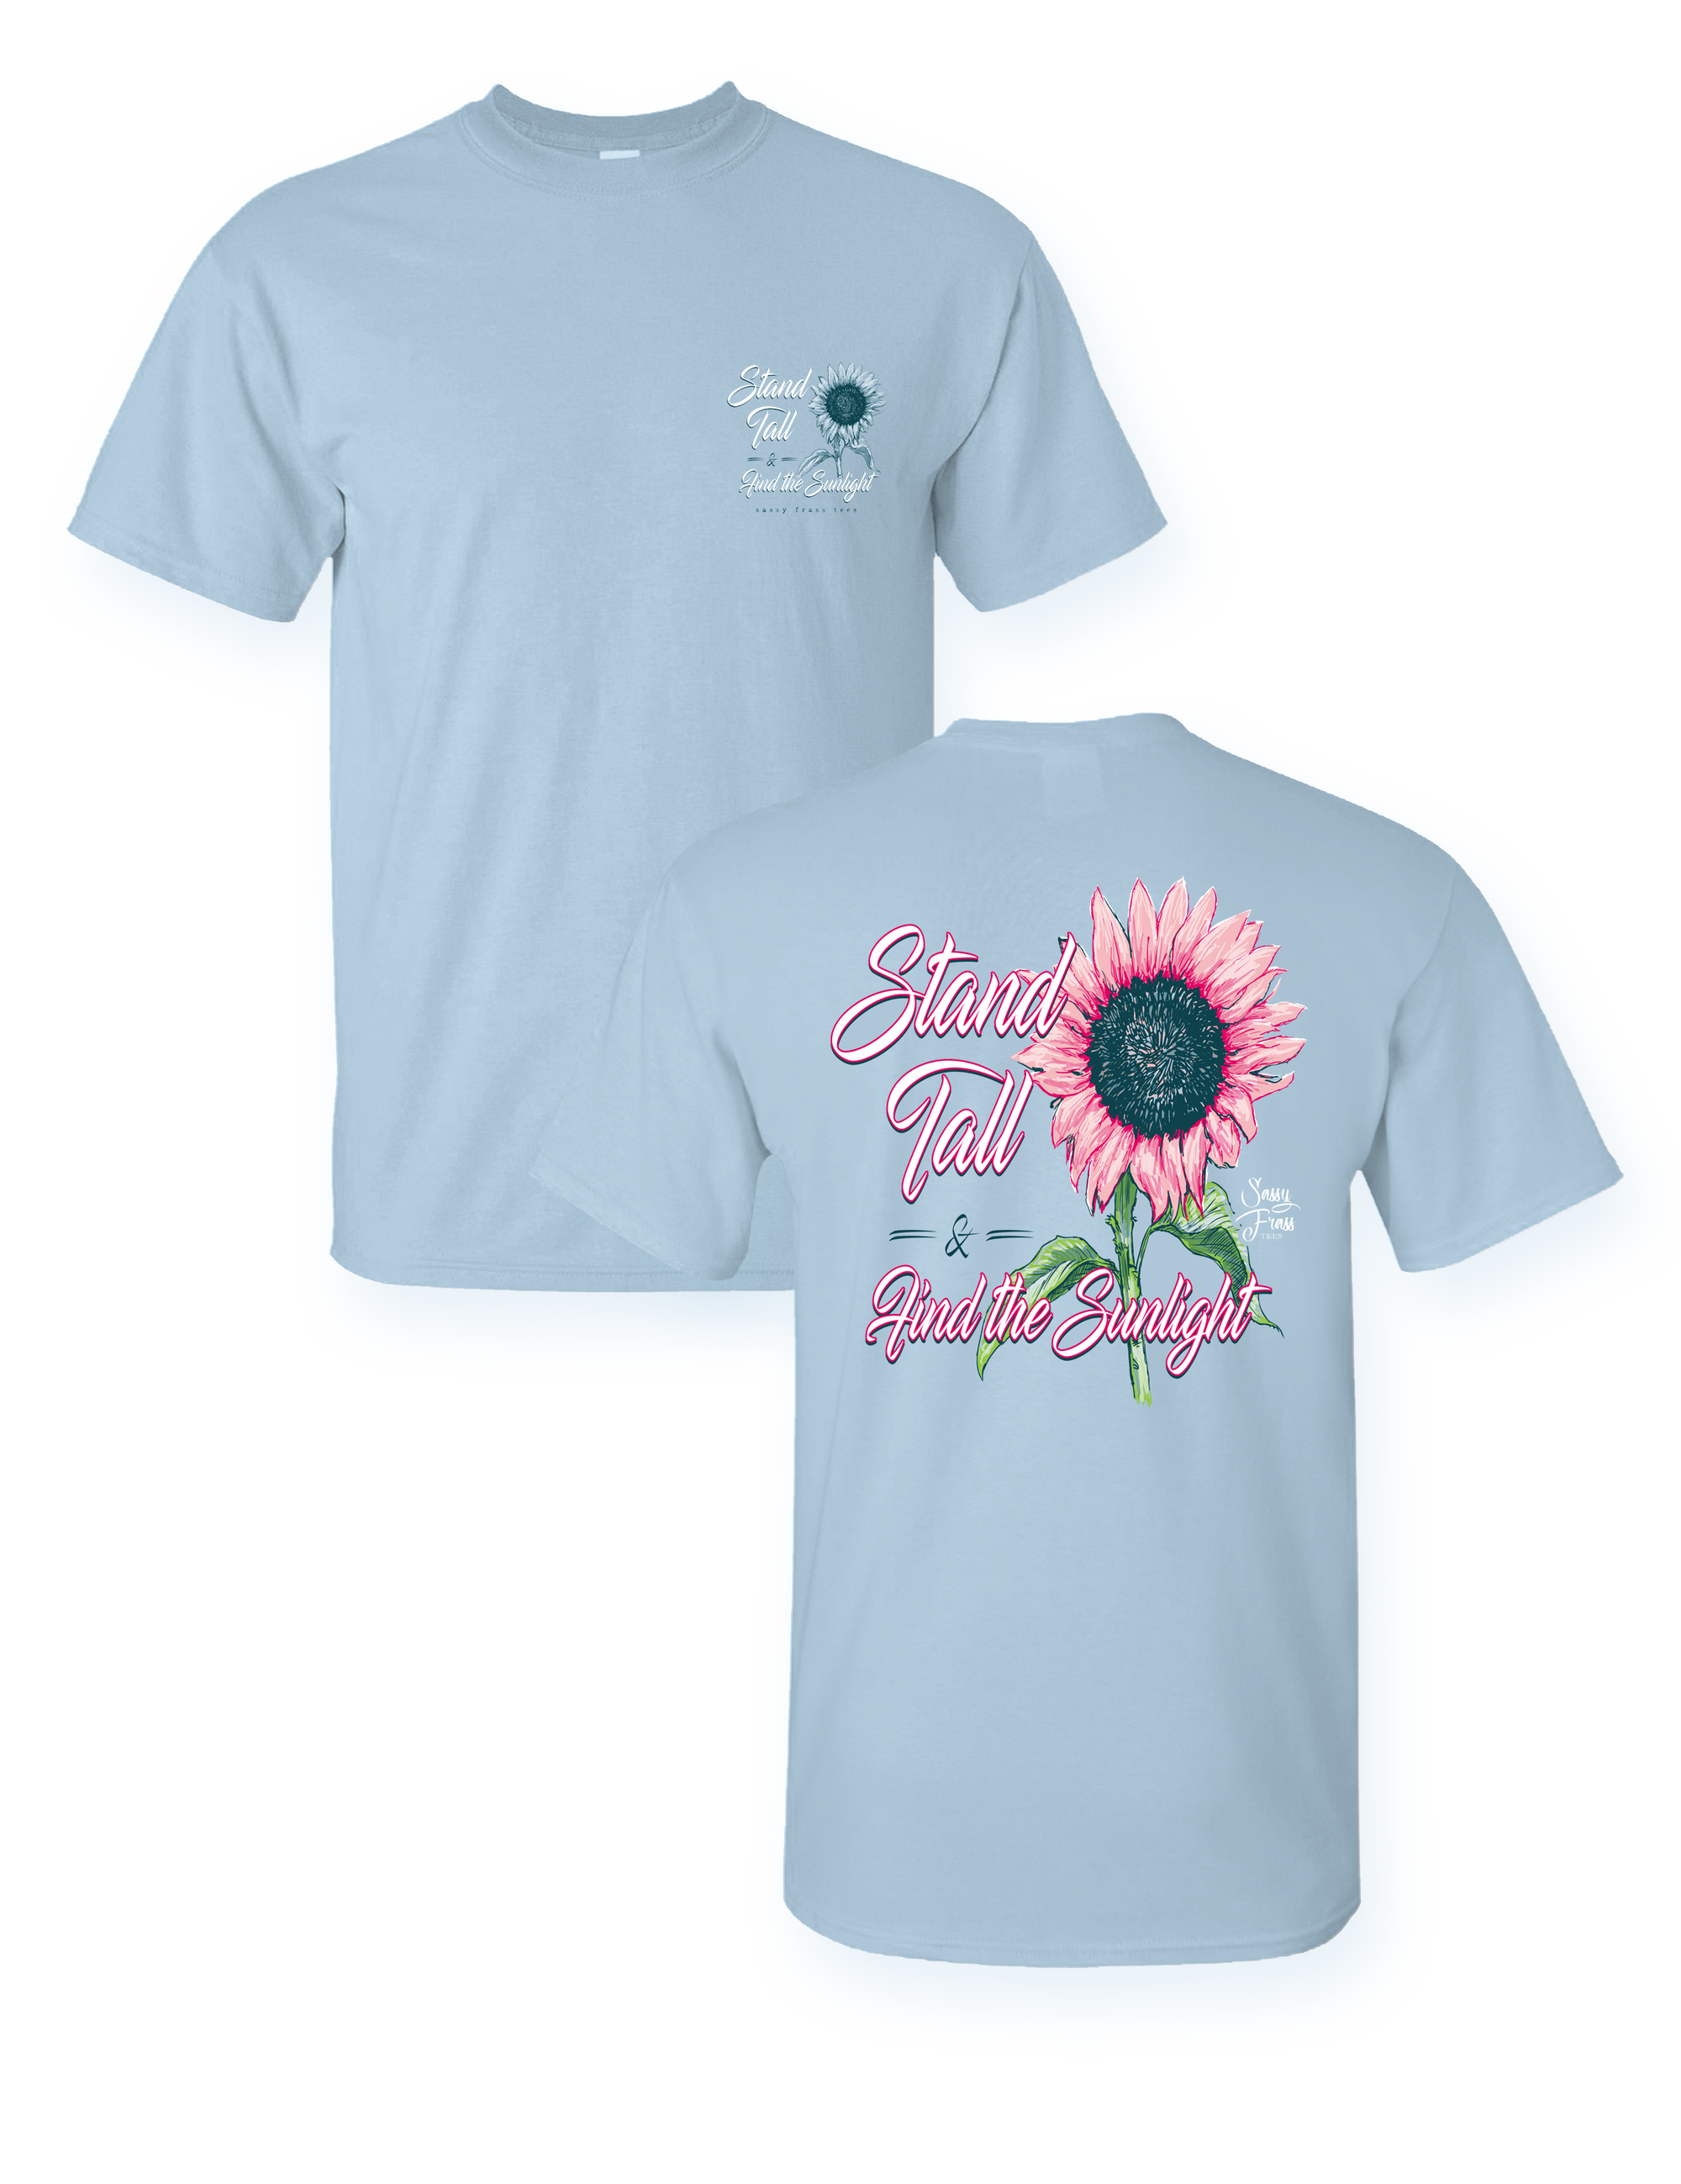 Sassy Frass Stand Tall & Find the Sunlight Sunflower Comfort Colors Bright T Shirt